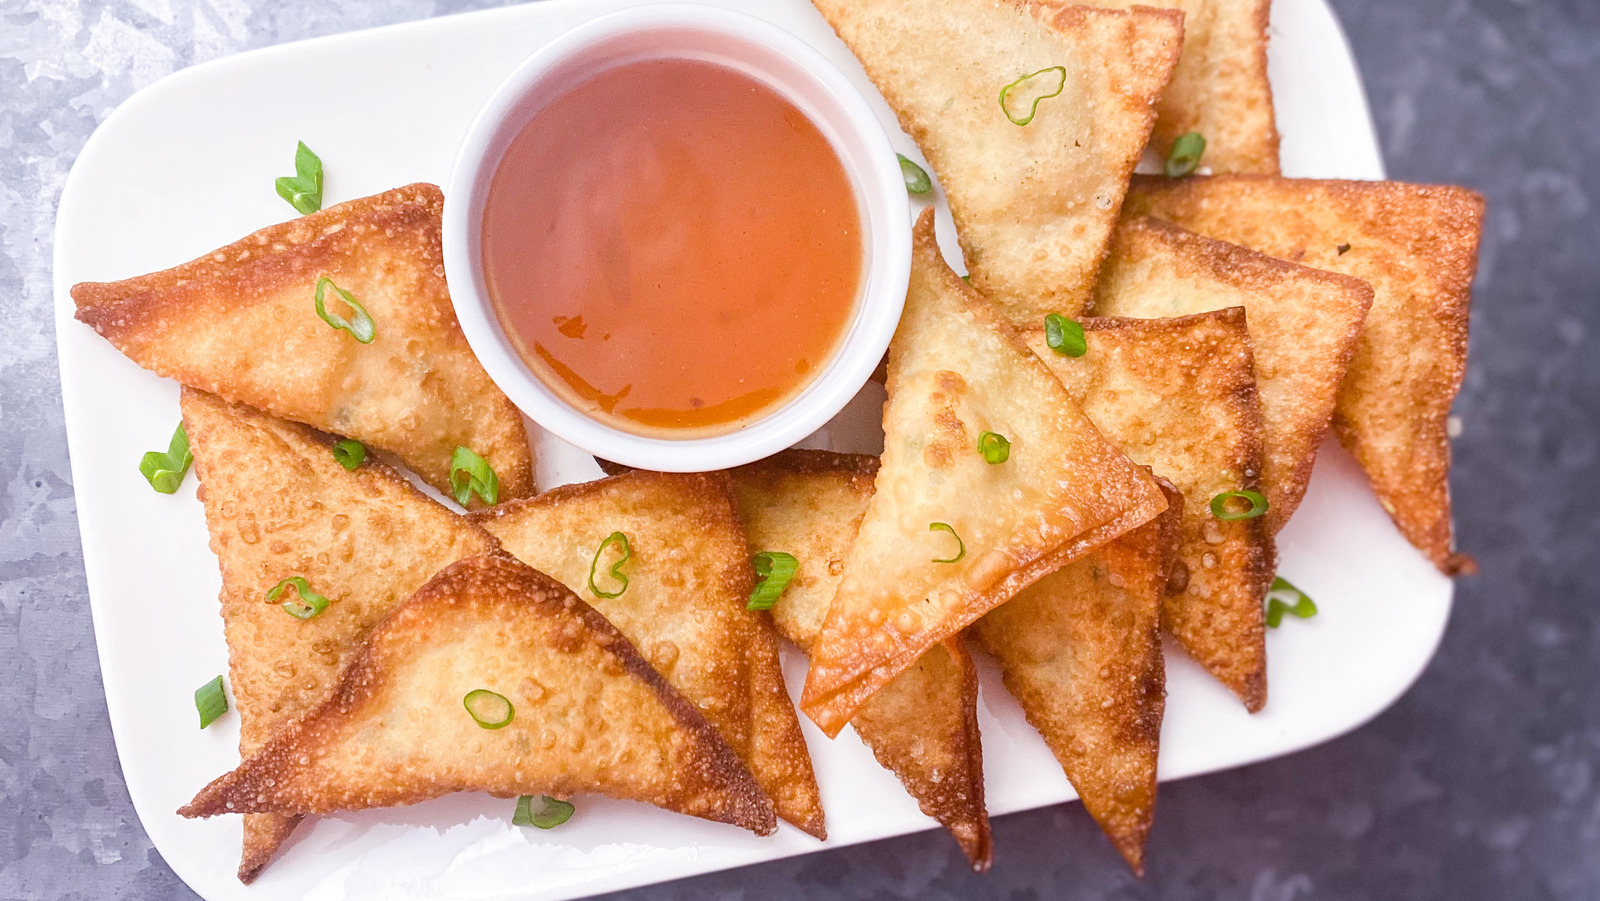 How many calories are in 10 crab Rangoon?